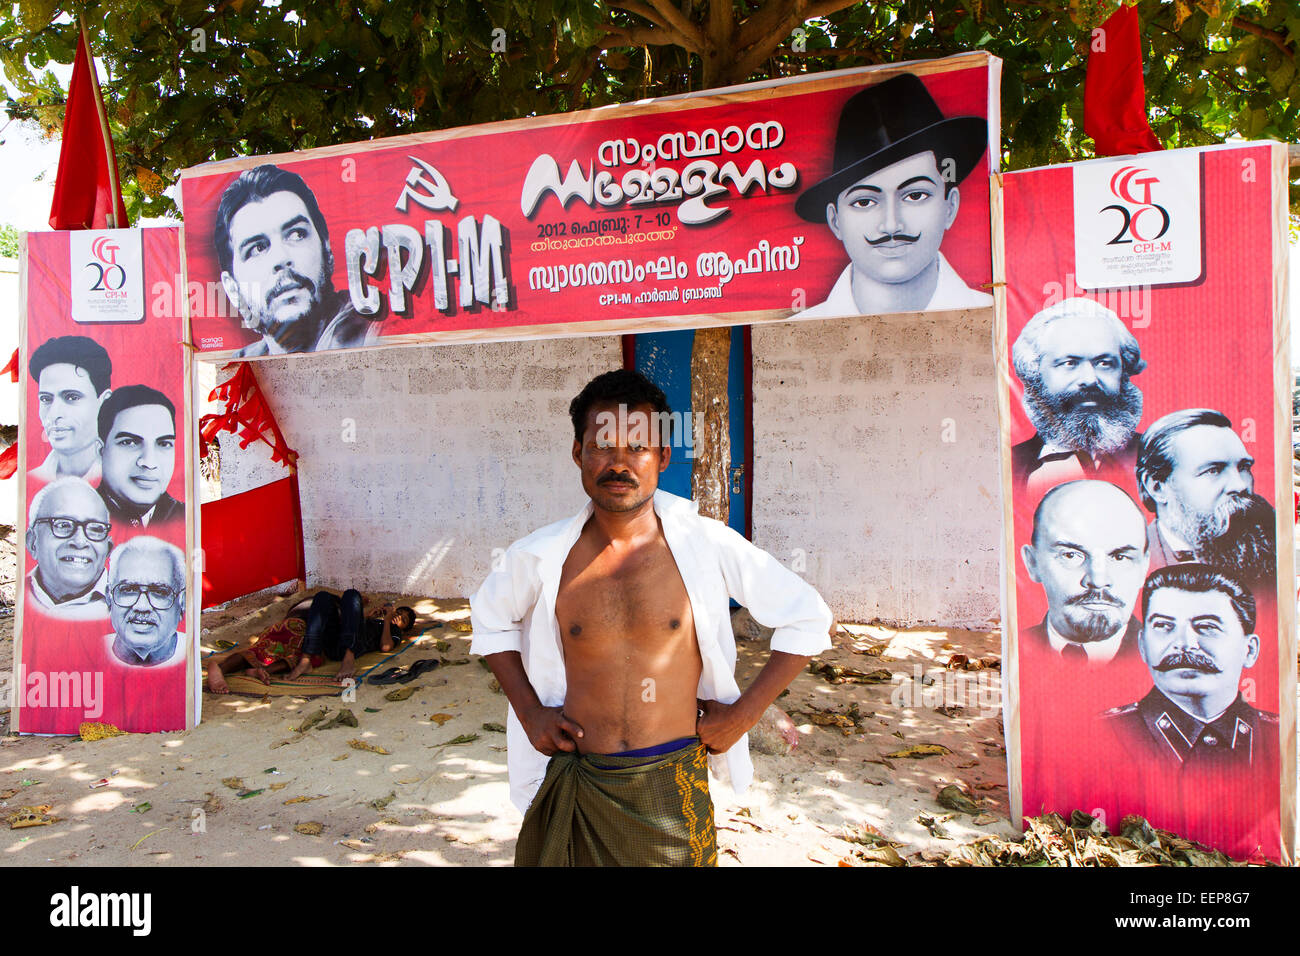 Vizhinjam, Kerala, INDIA - JAN 12: People and campaign during the communist party elections on JAN 12, 2012 in Vizhinjam, Kerala Stock Photo